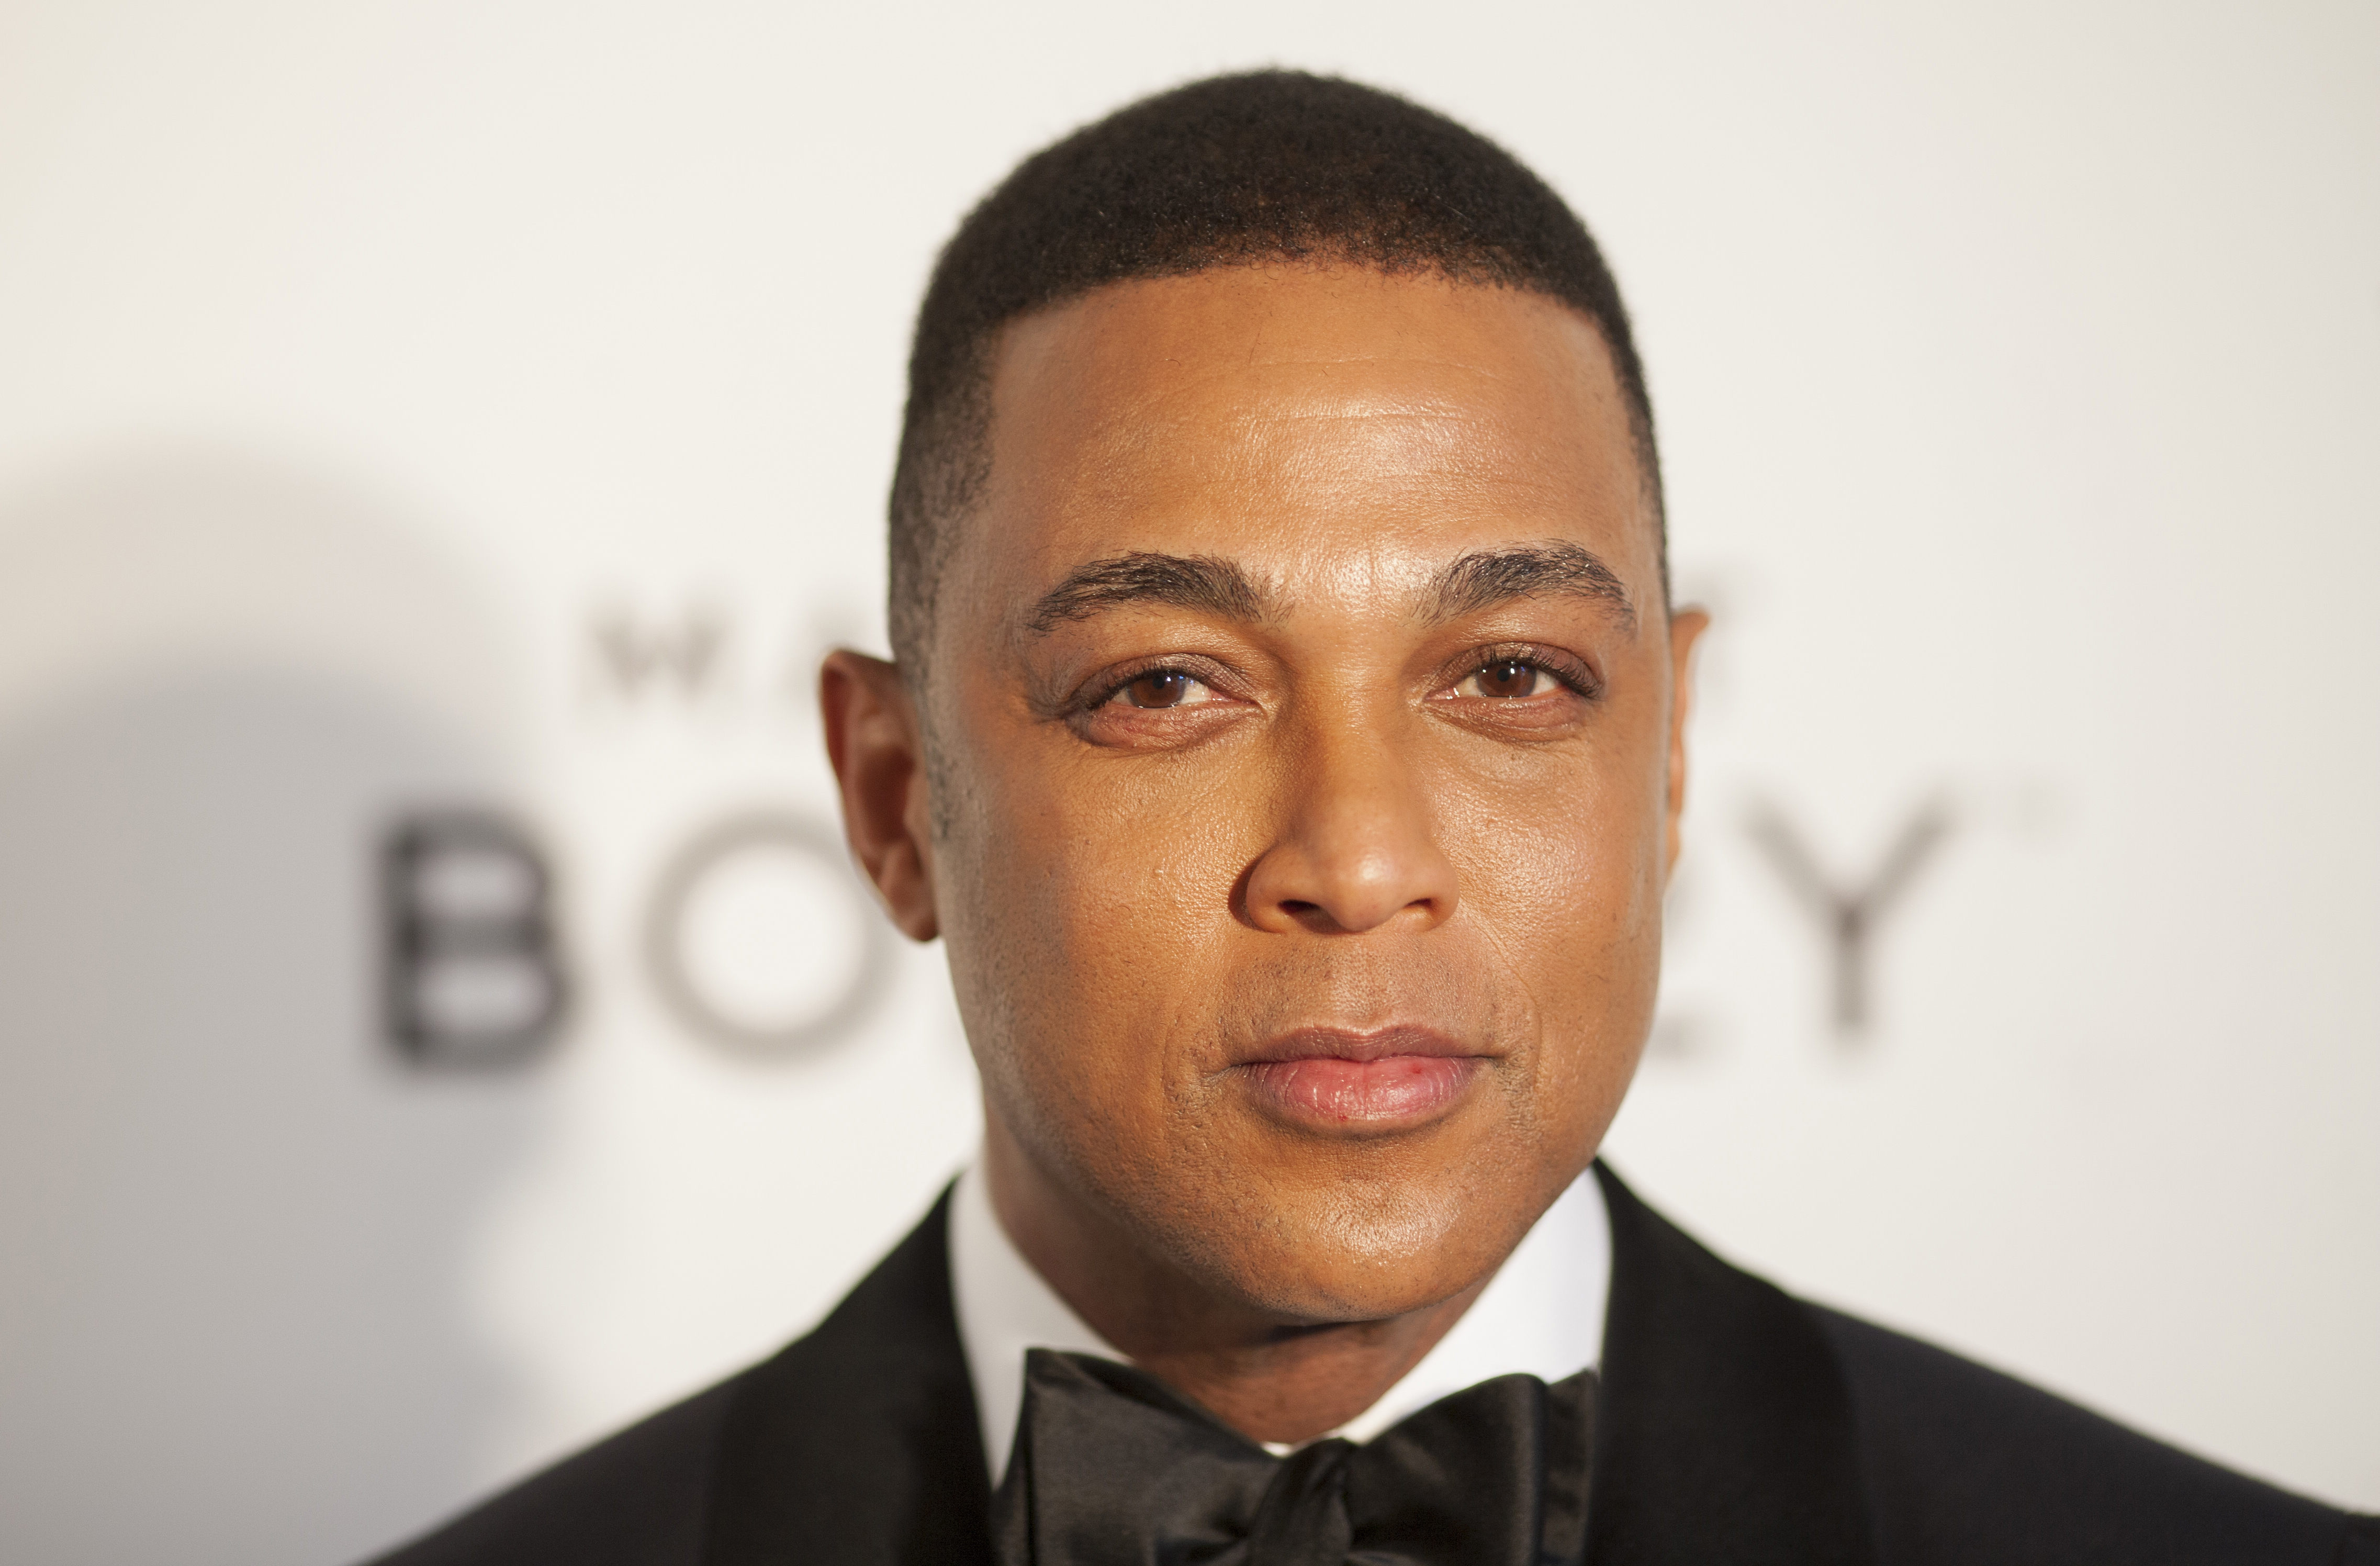 Don Lemon at 27th Annual Elton John Aids Foundation Academy Awards Viewing Party